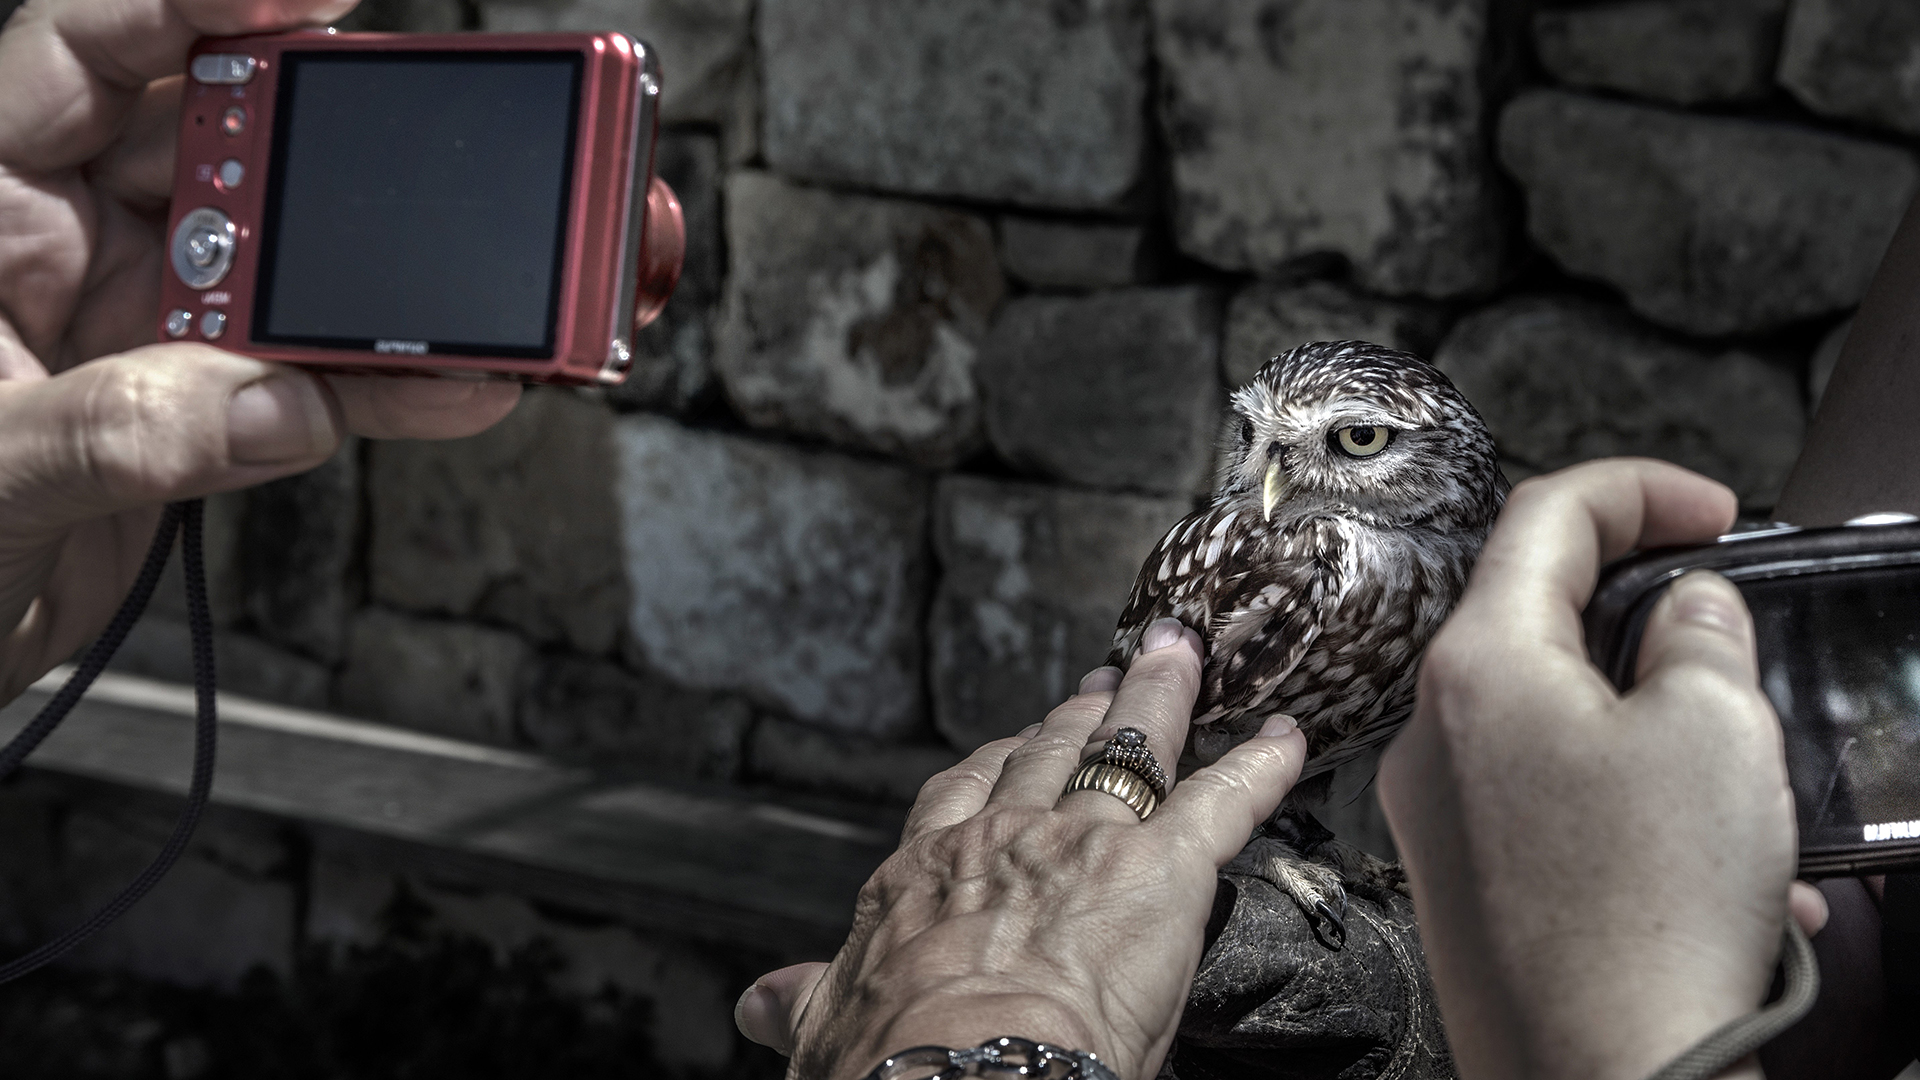 A photo of a small owl in a captive setting. People are taking close-up photos and touching the bird.